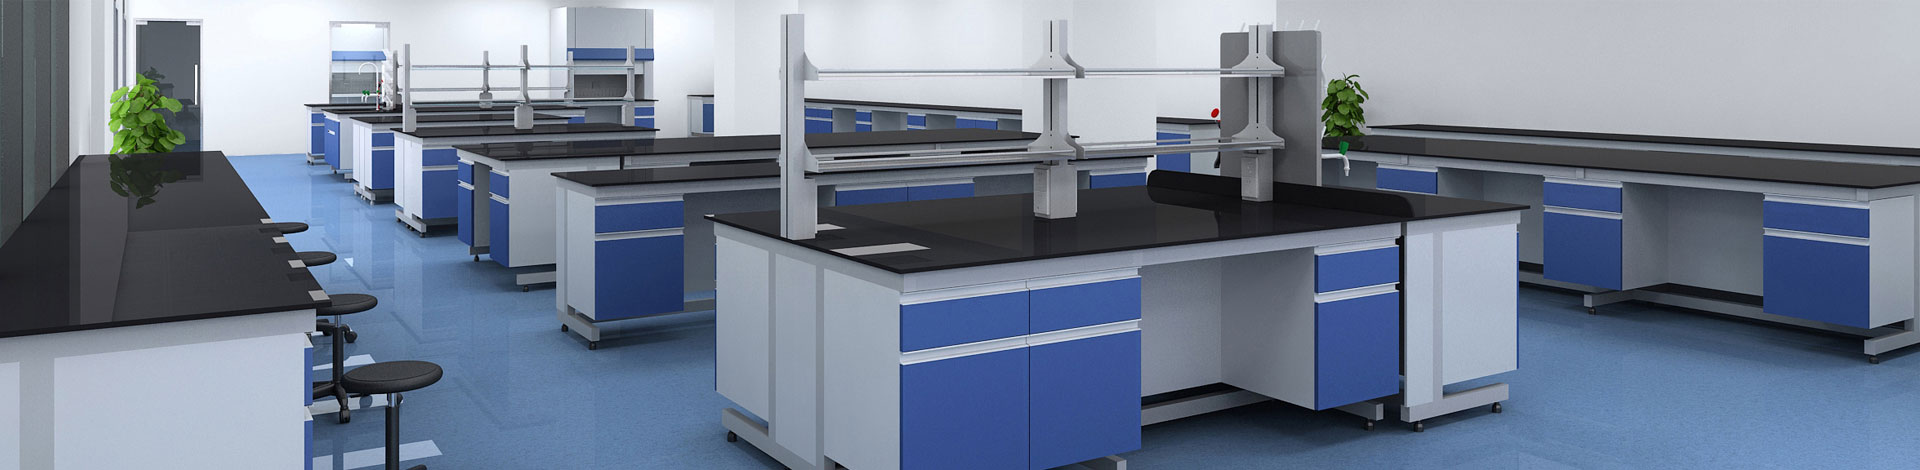 Integrated Solution For Modern Laboratory Furniture System